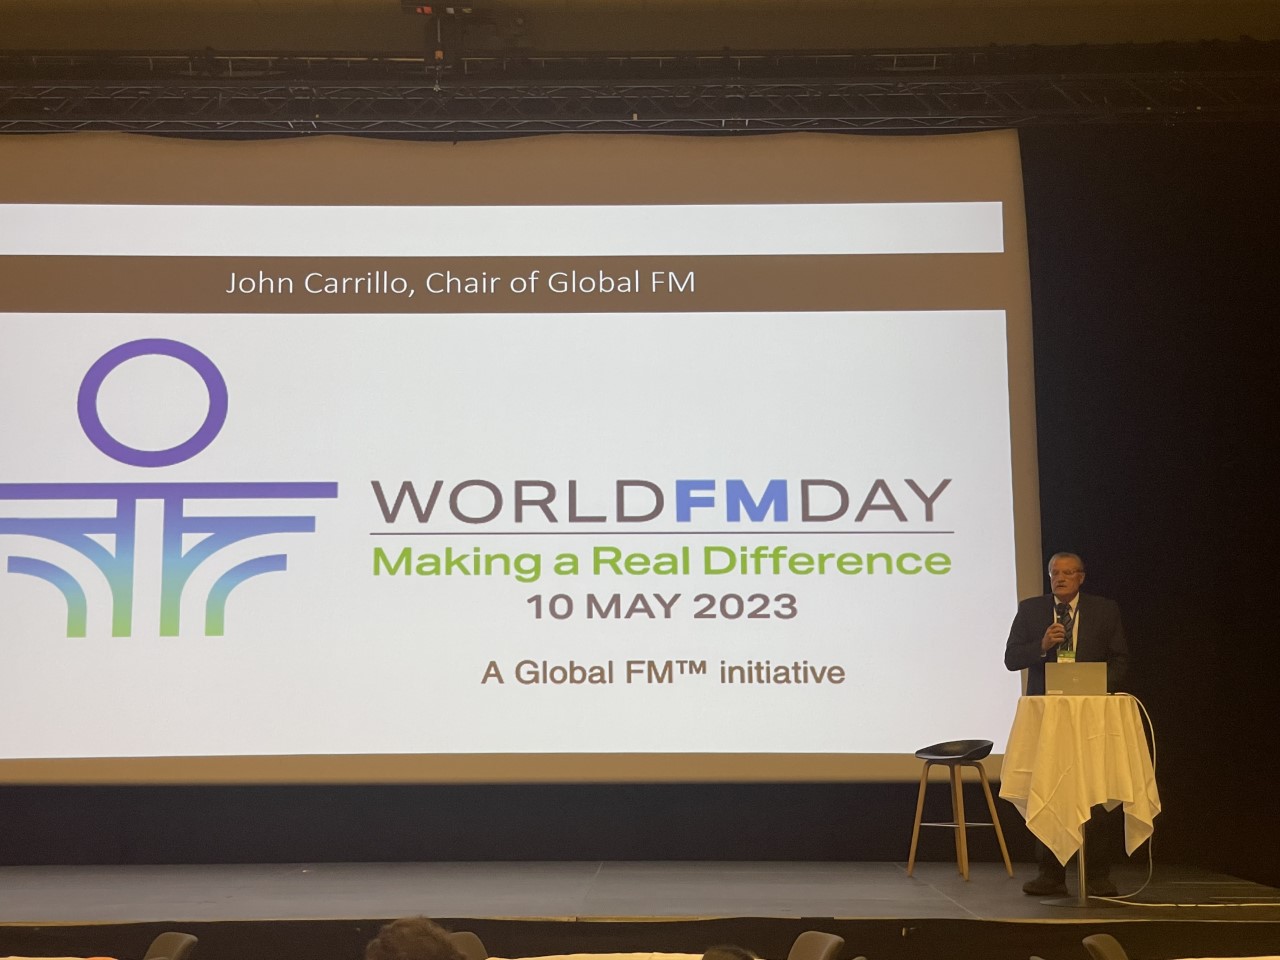 Photo 2 of the world fm day event